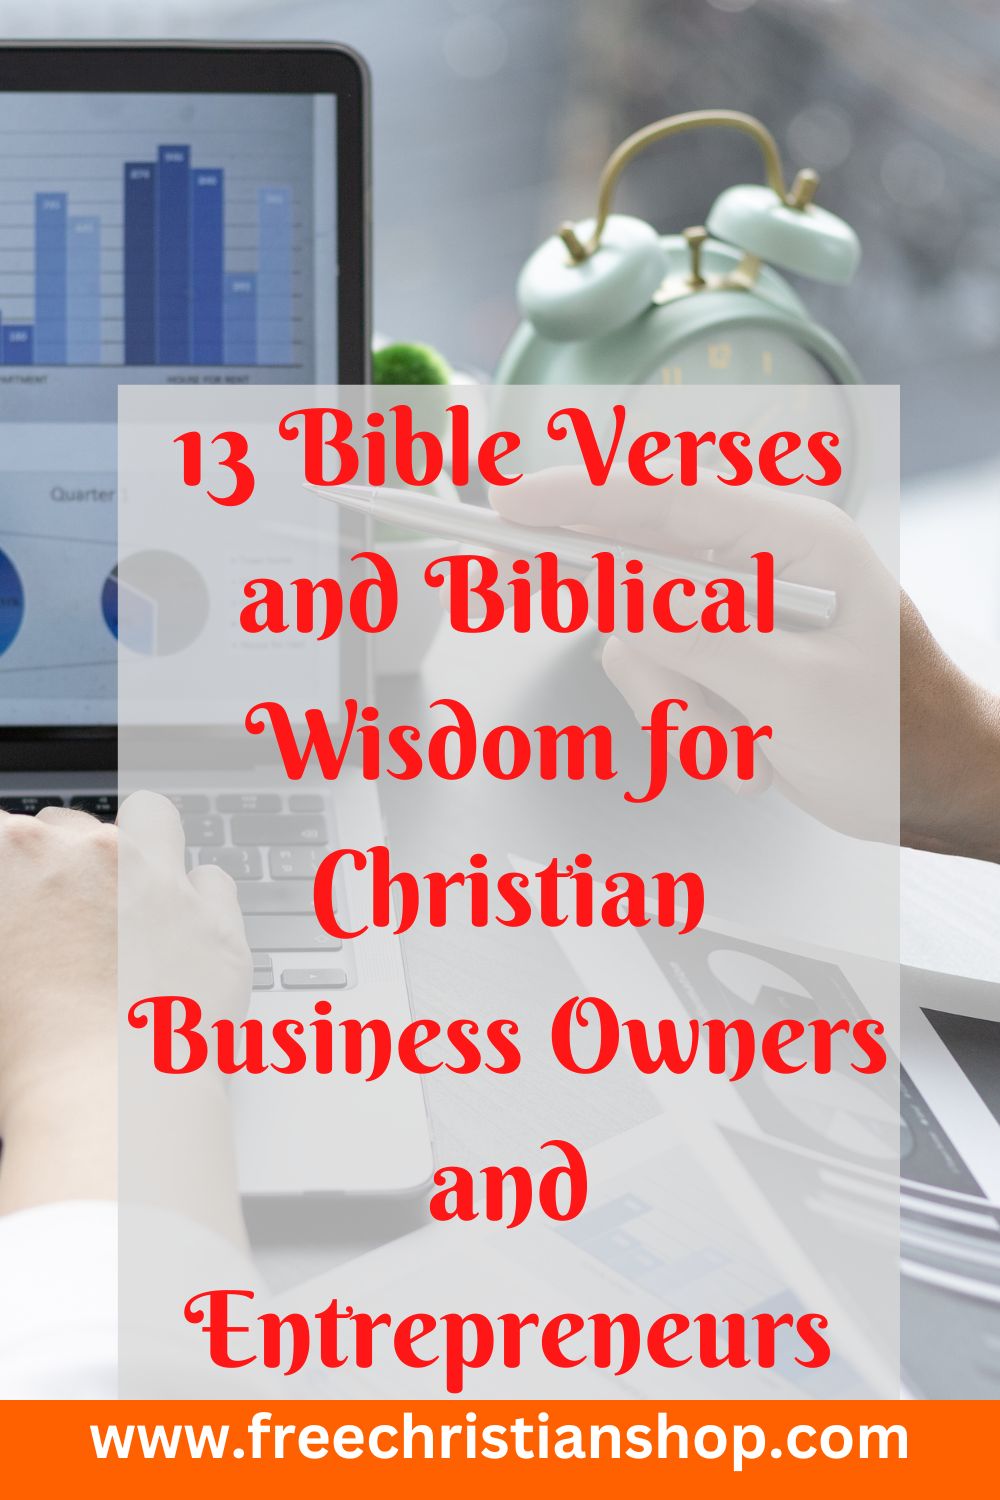 13 Bible Verses and Biblical Wisdom for Christian Business Owners and Entrepreneurs